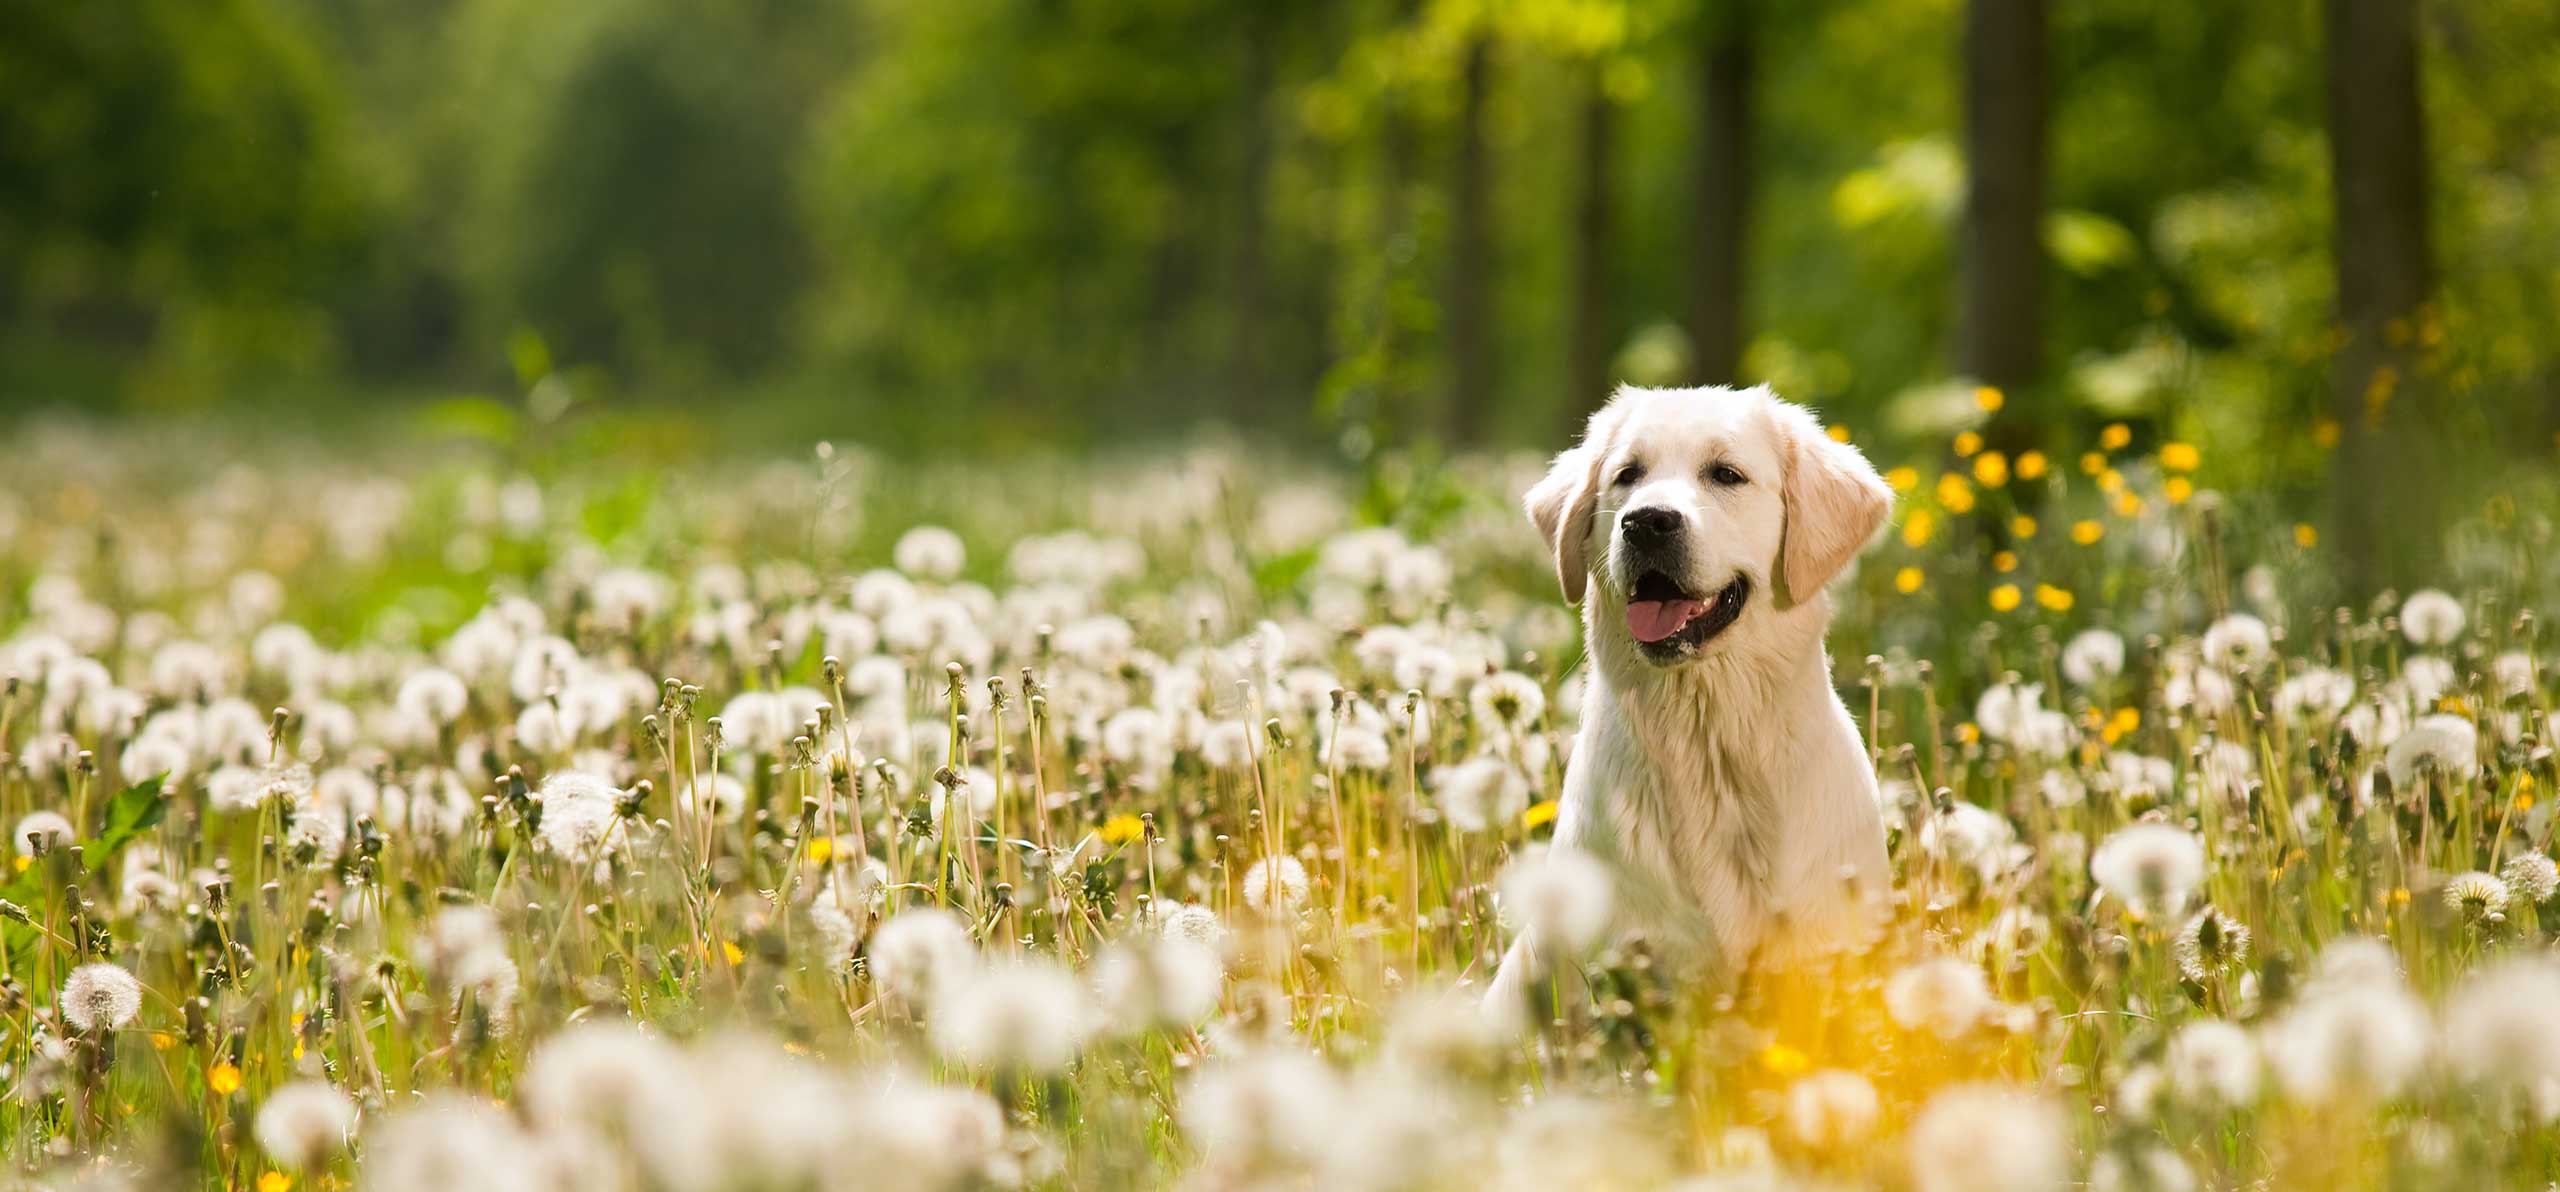 white lab smiling within a field of tall dandelions